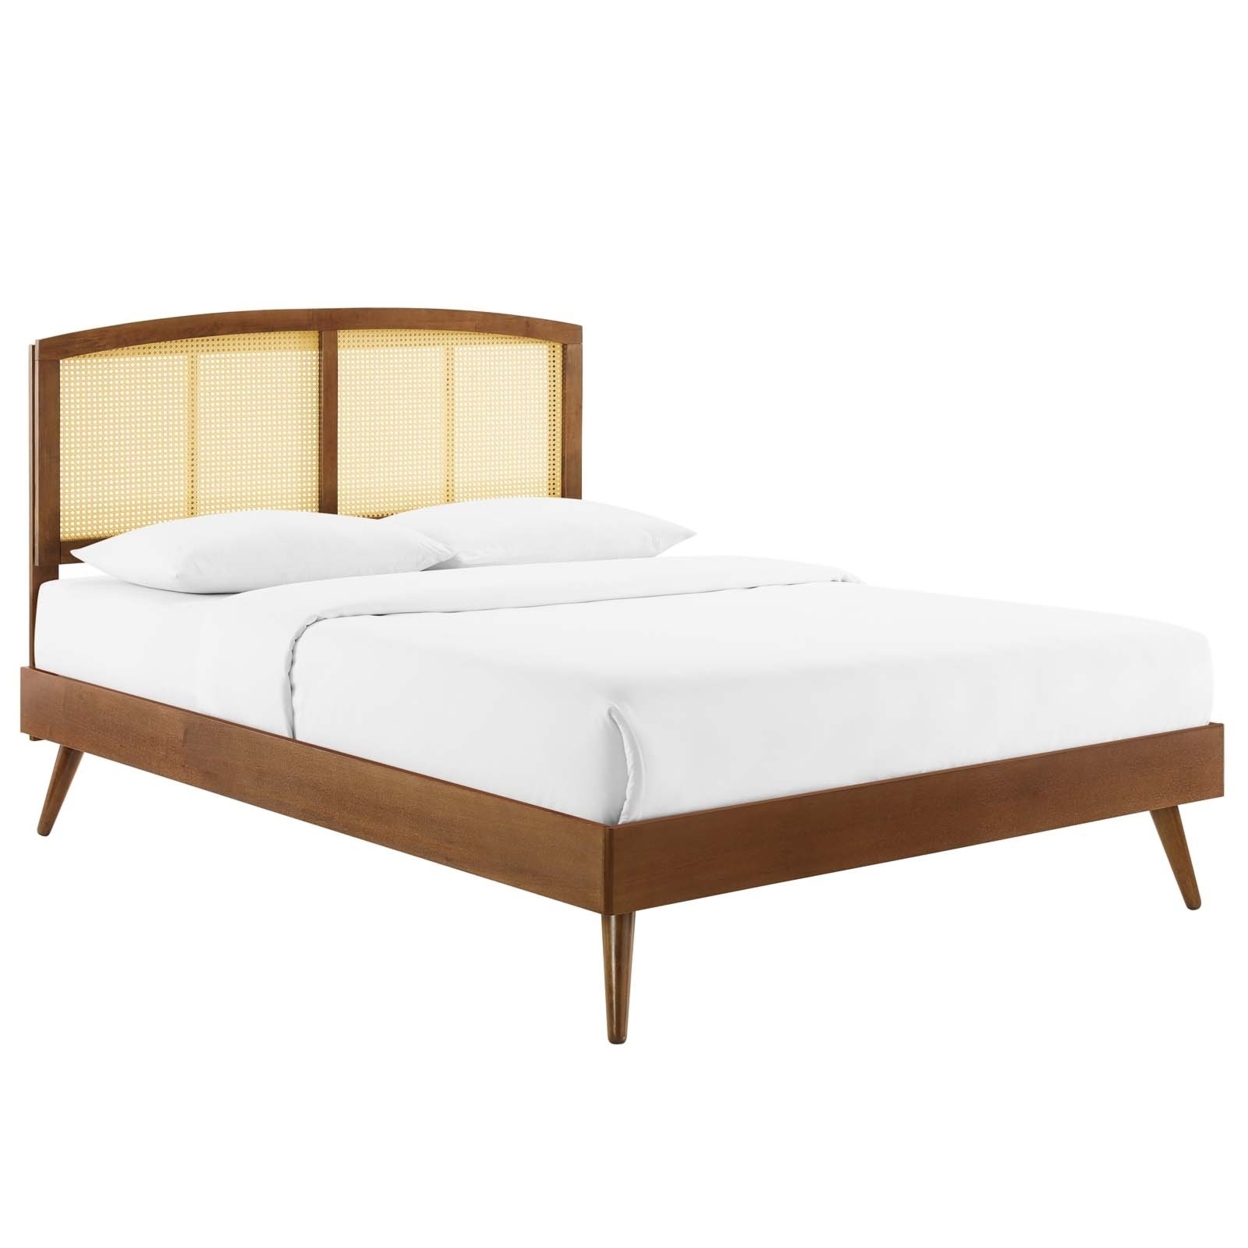 Sierra Cane And Wood Queen Platform Bed With Splayed Legs, Walnut